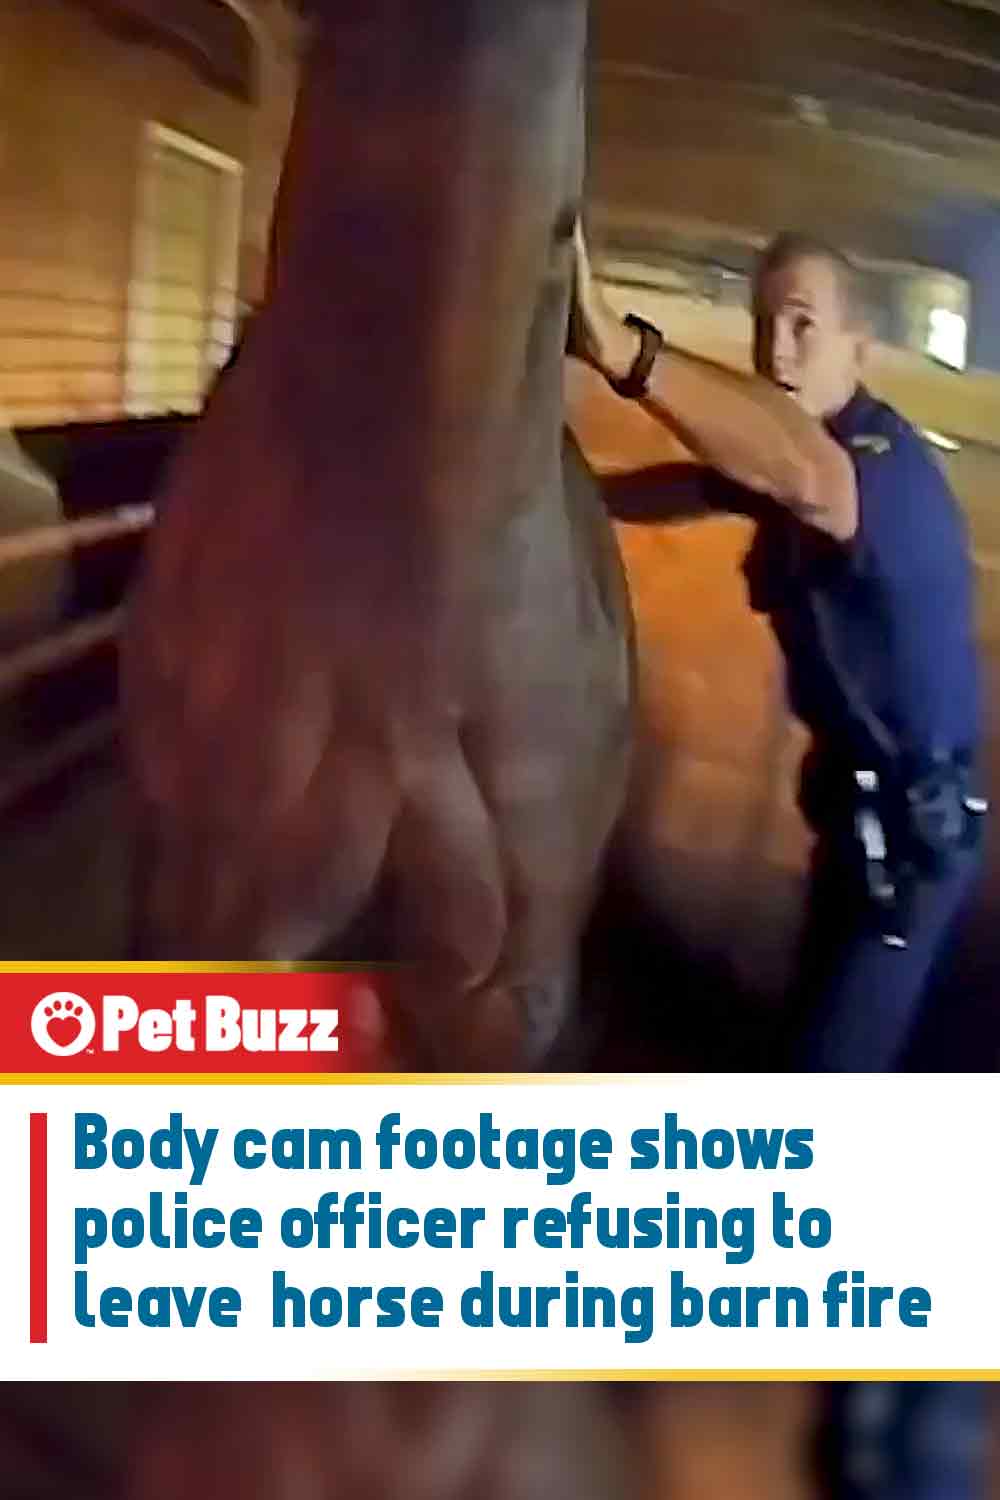 Body cam footage shows police officer refusing to leave horse during barn fire